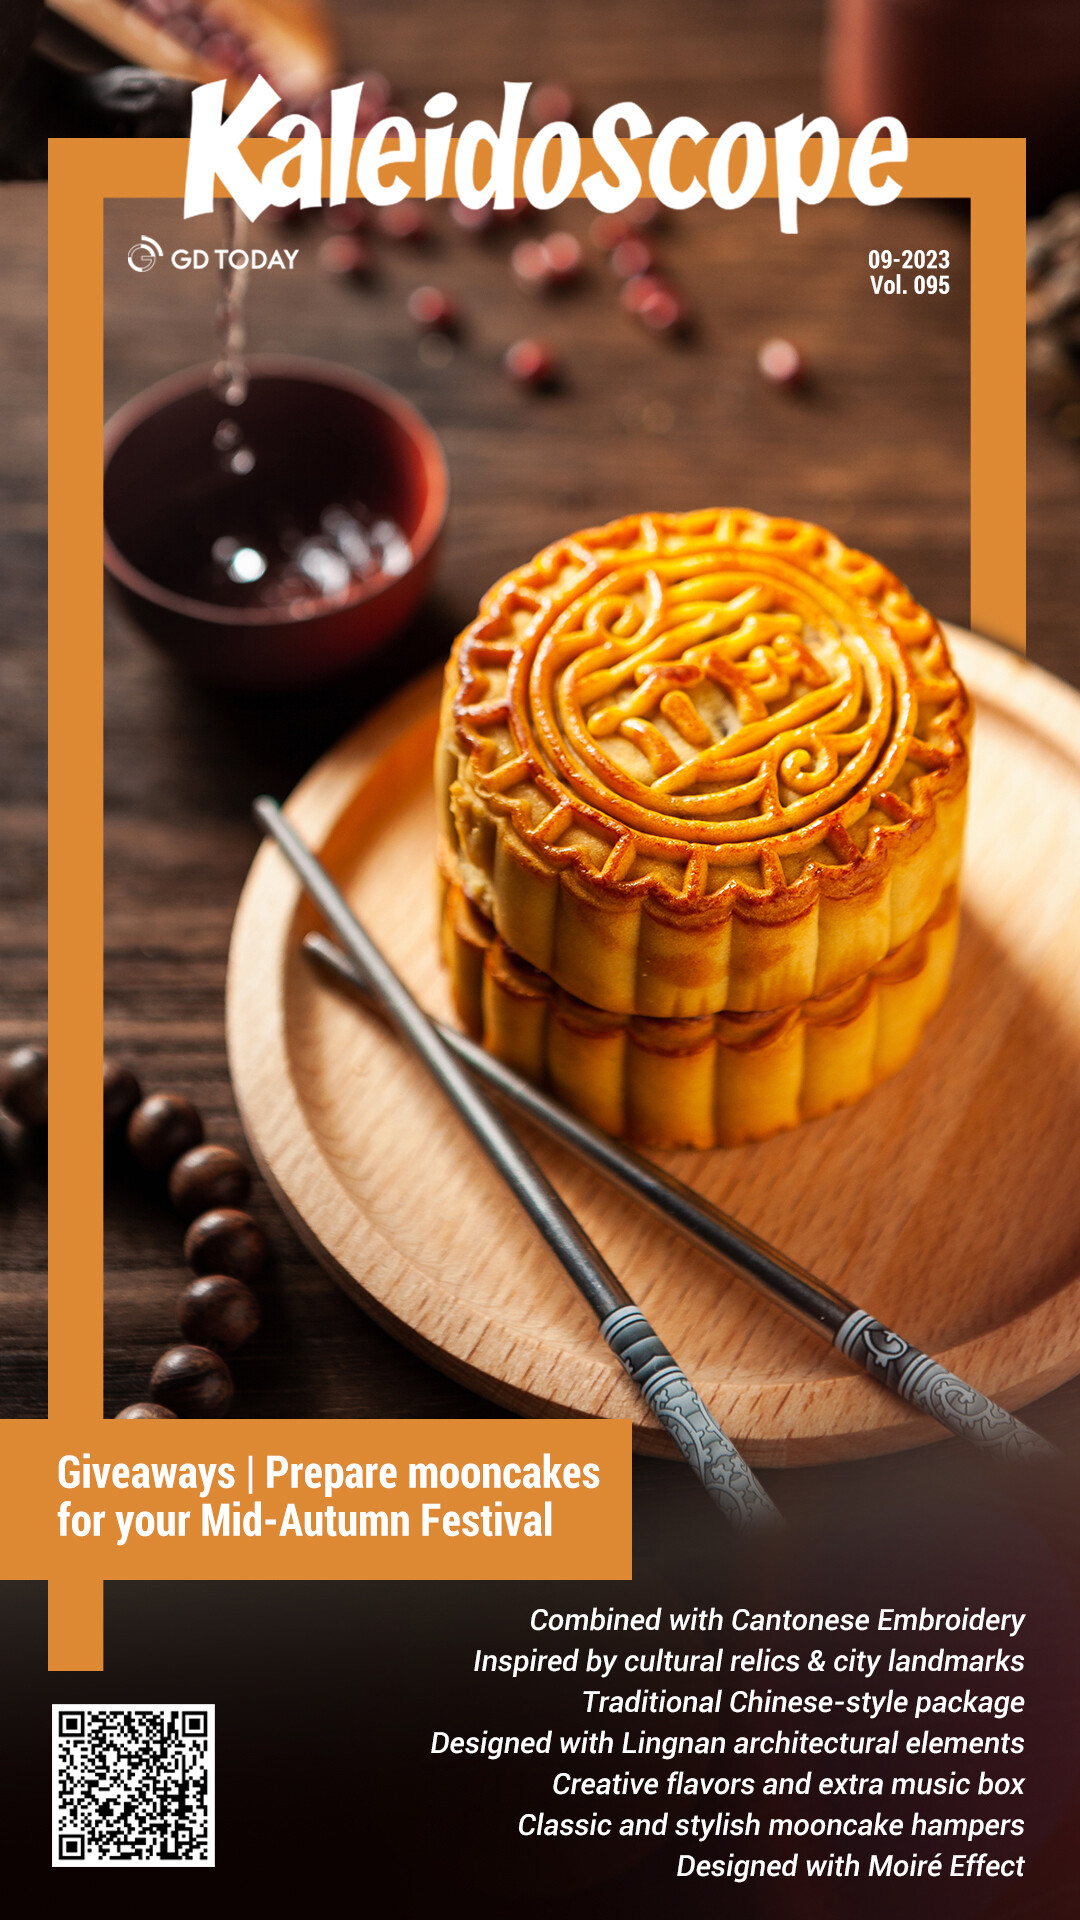 Mid-Autumn Festival Mooncake Gift Box -1-3 Days for Delivery - No